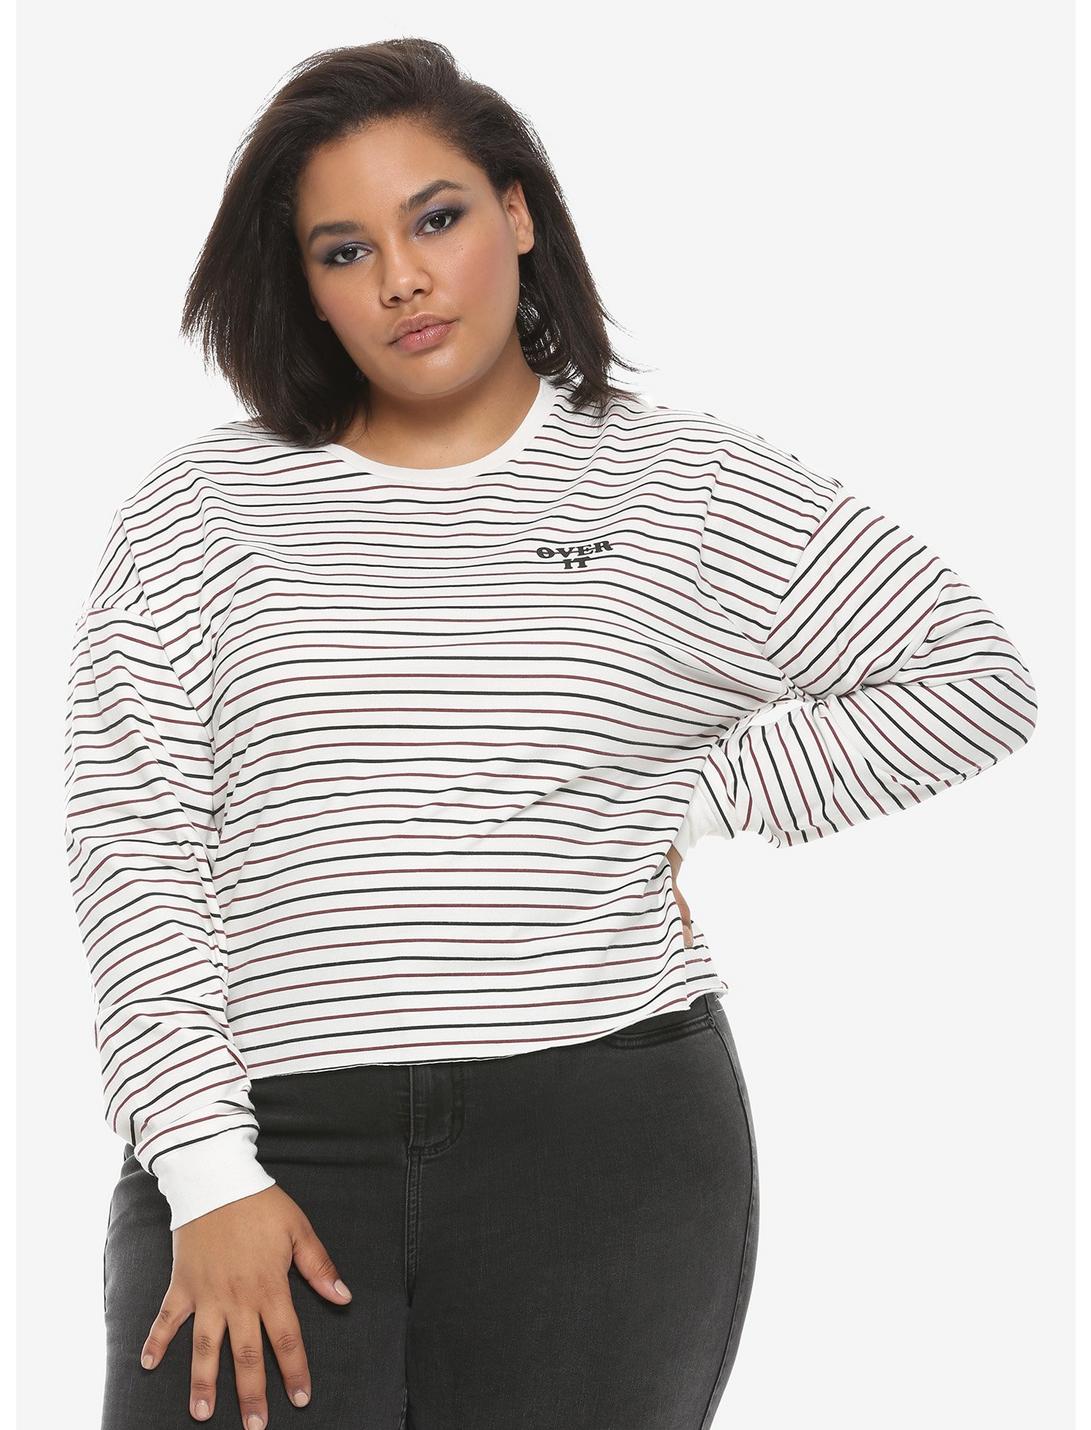 Over It Striped Girls Long-Sleeve T-Shirt Plus Size, MULTI, hi-res